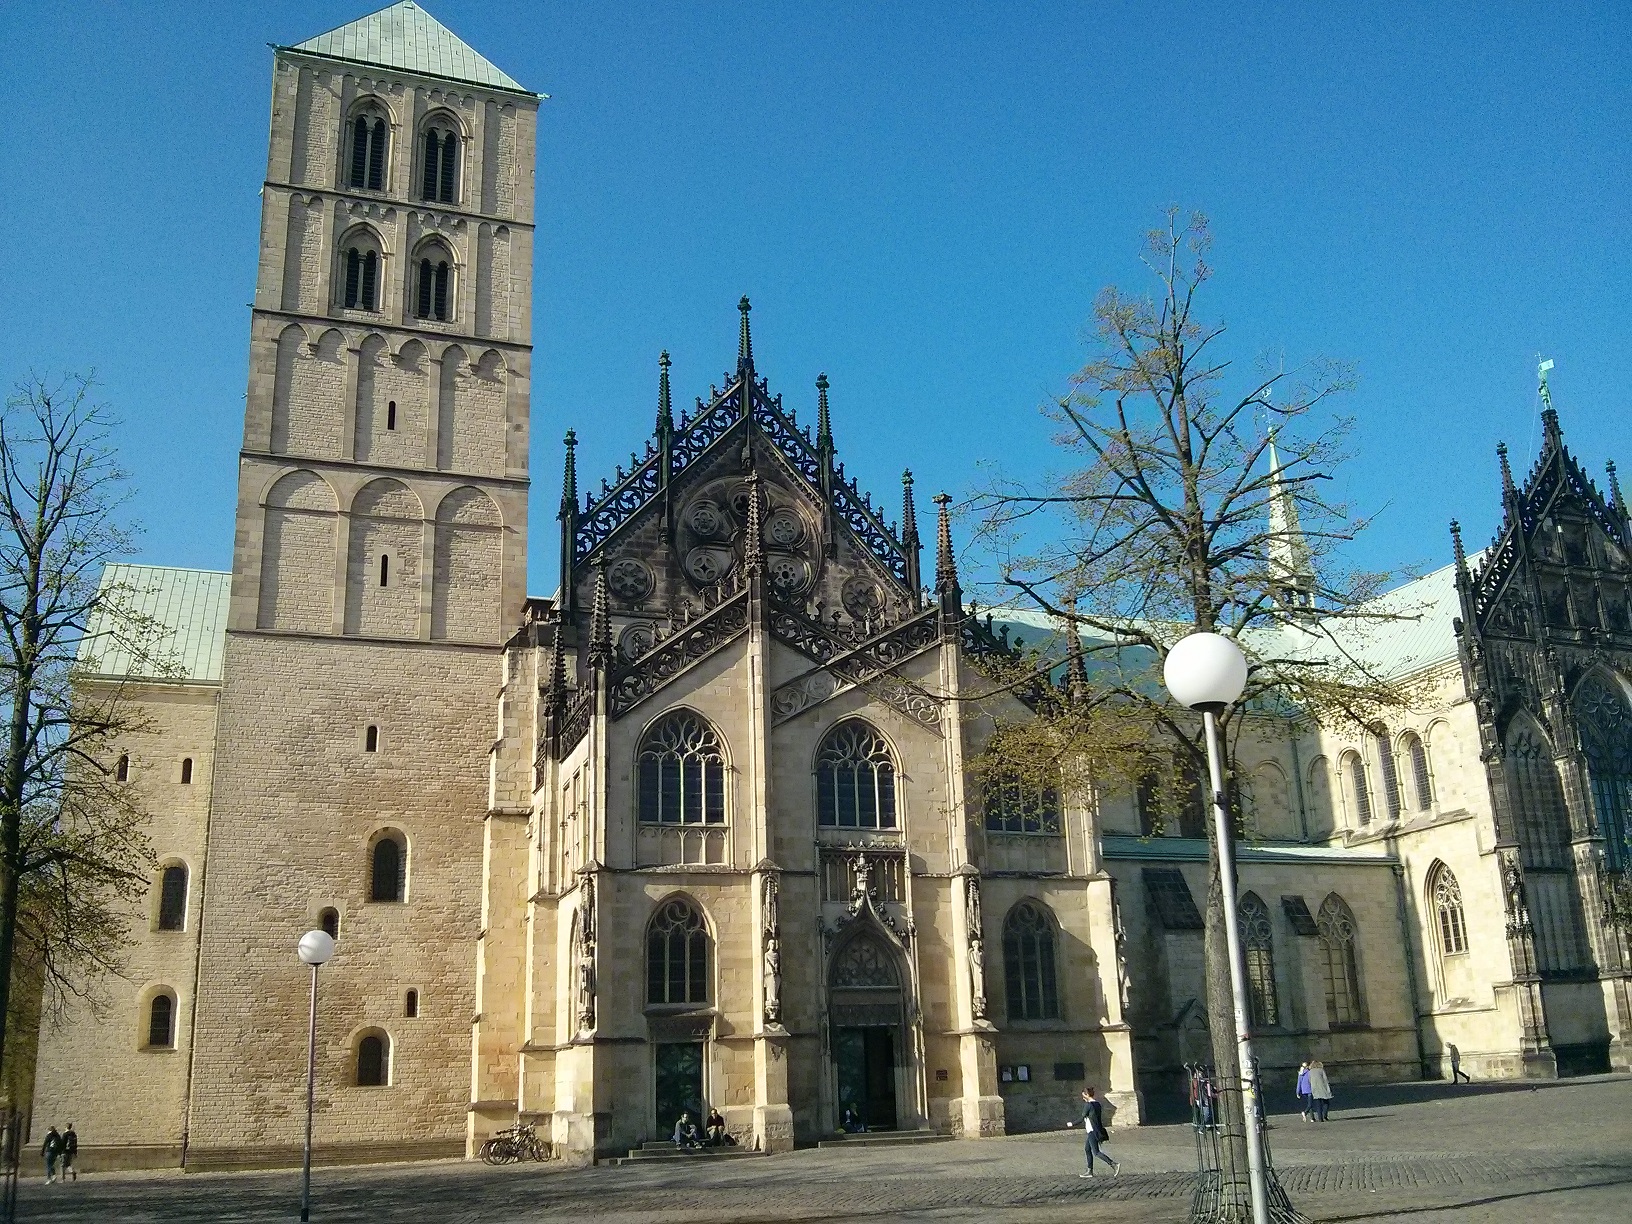 The 'Münster Dom'